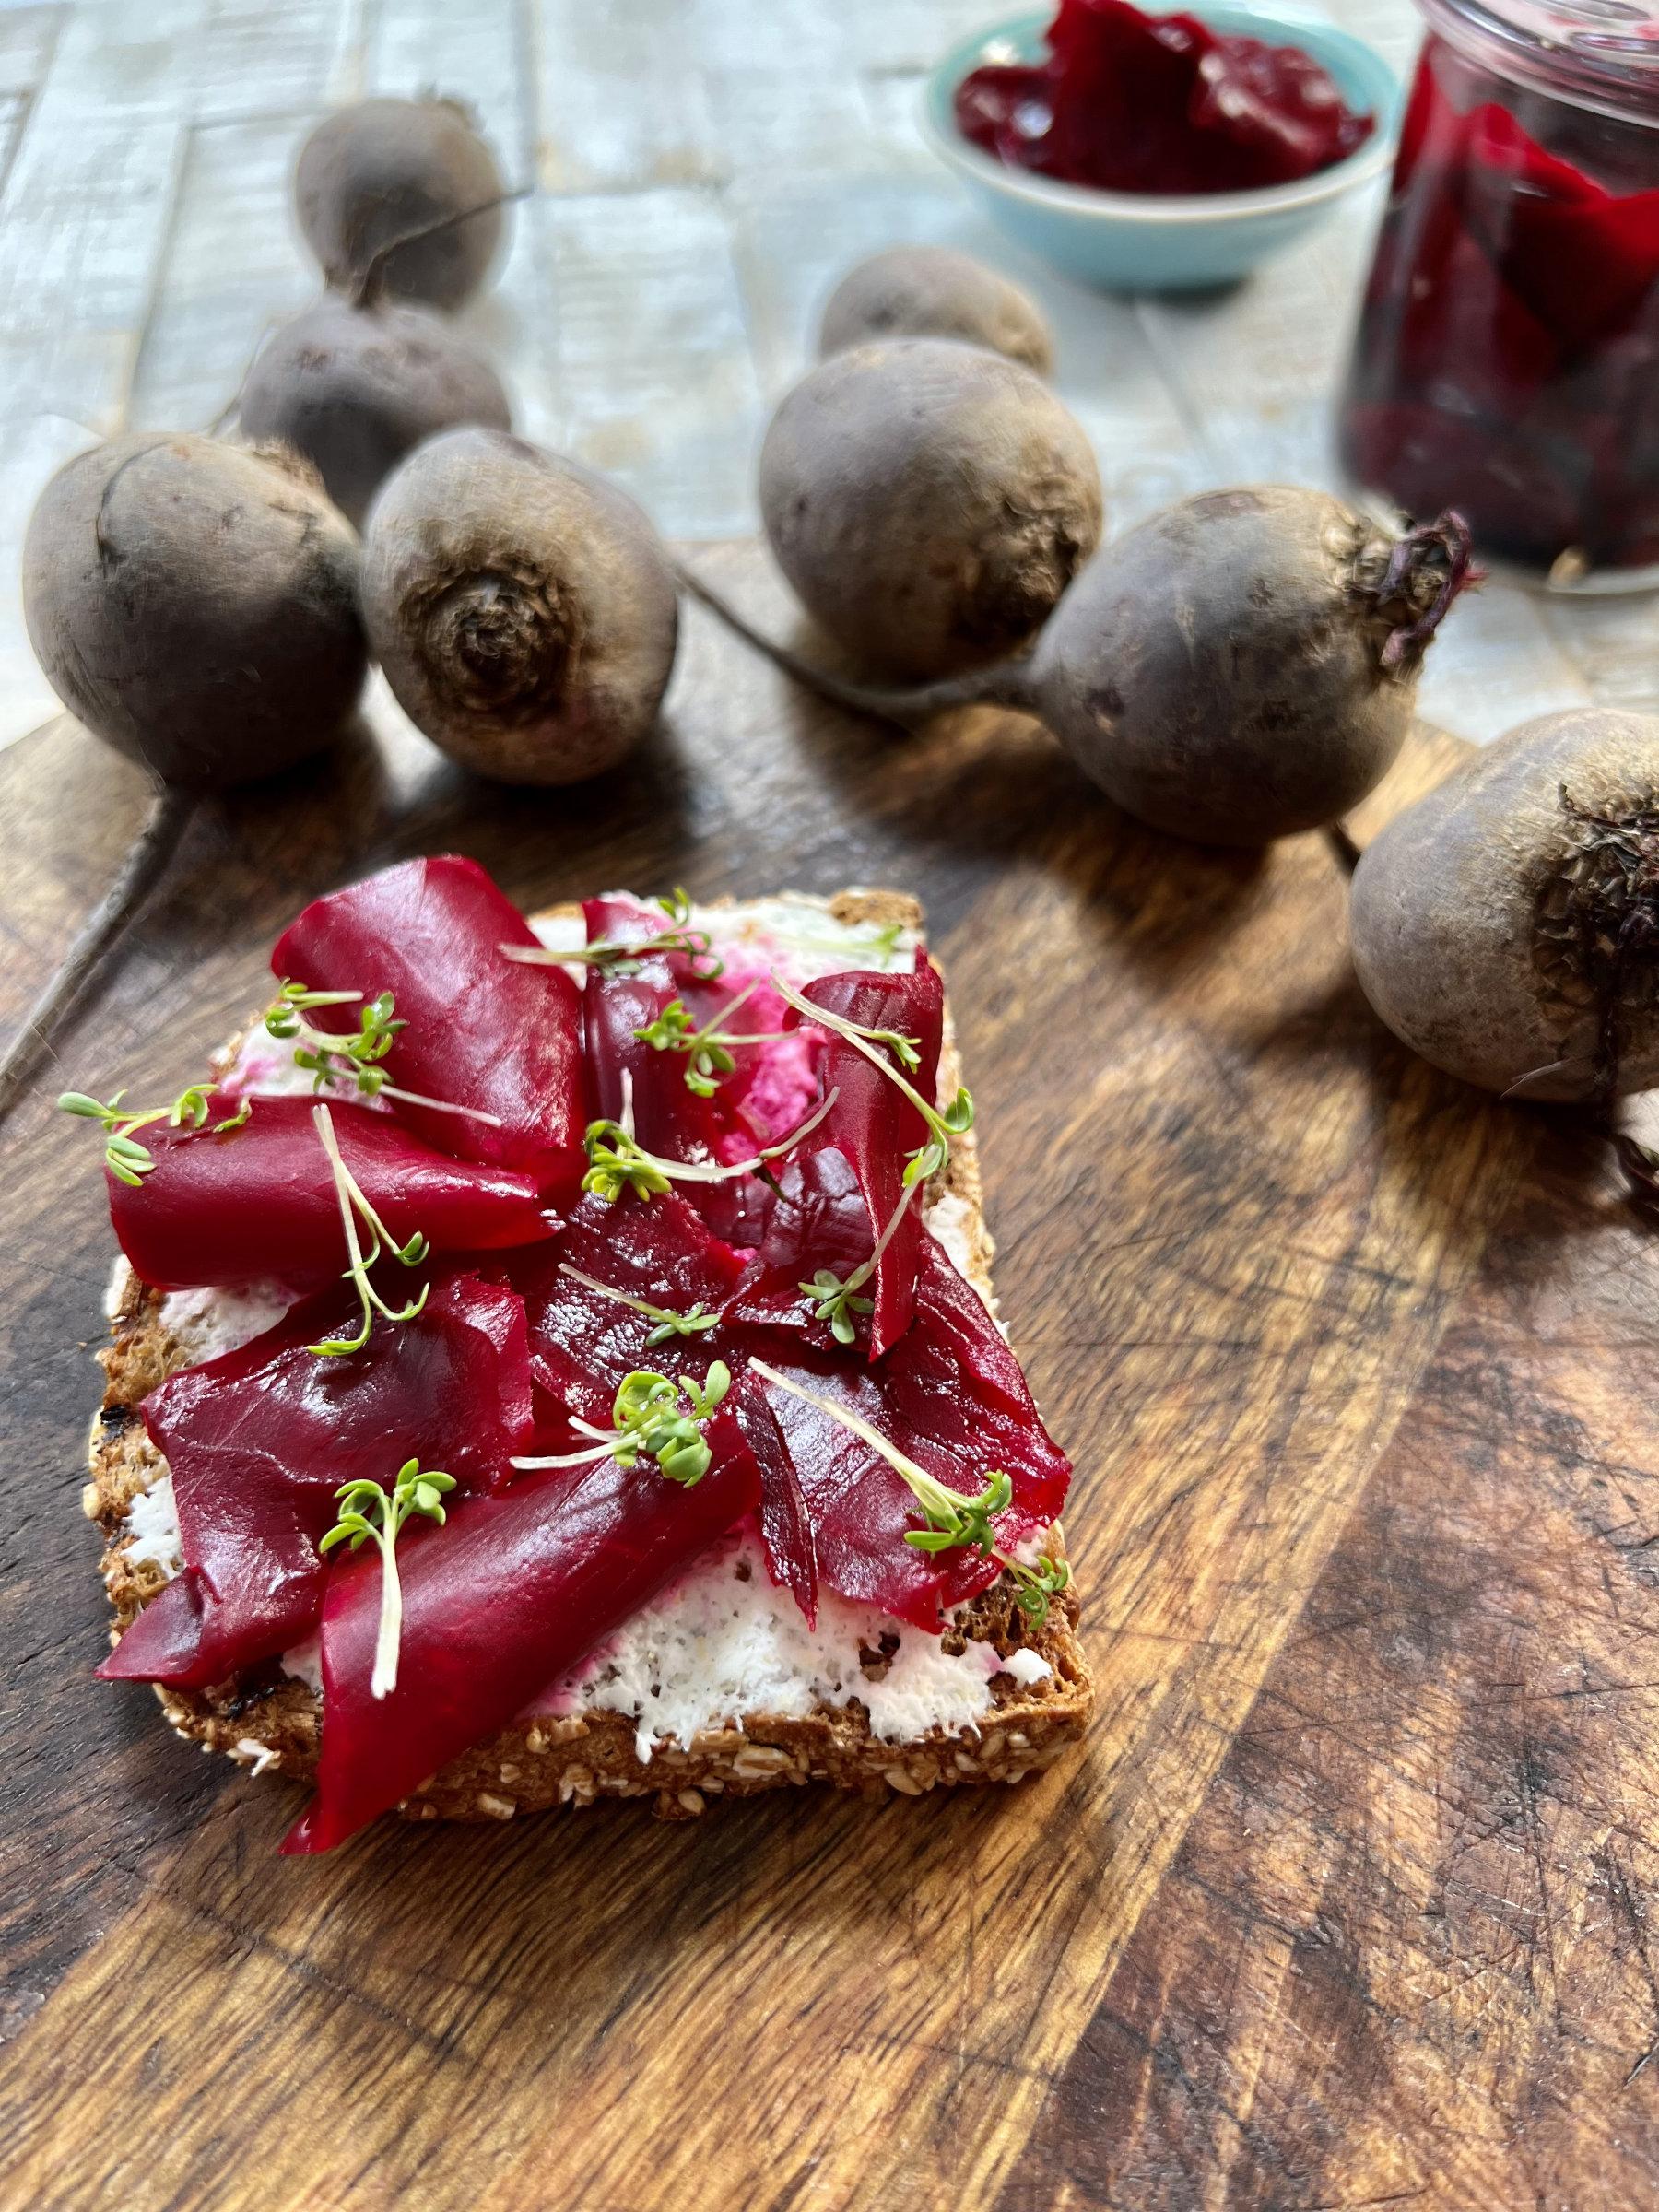 Pickled beets on bread